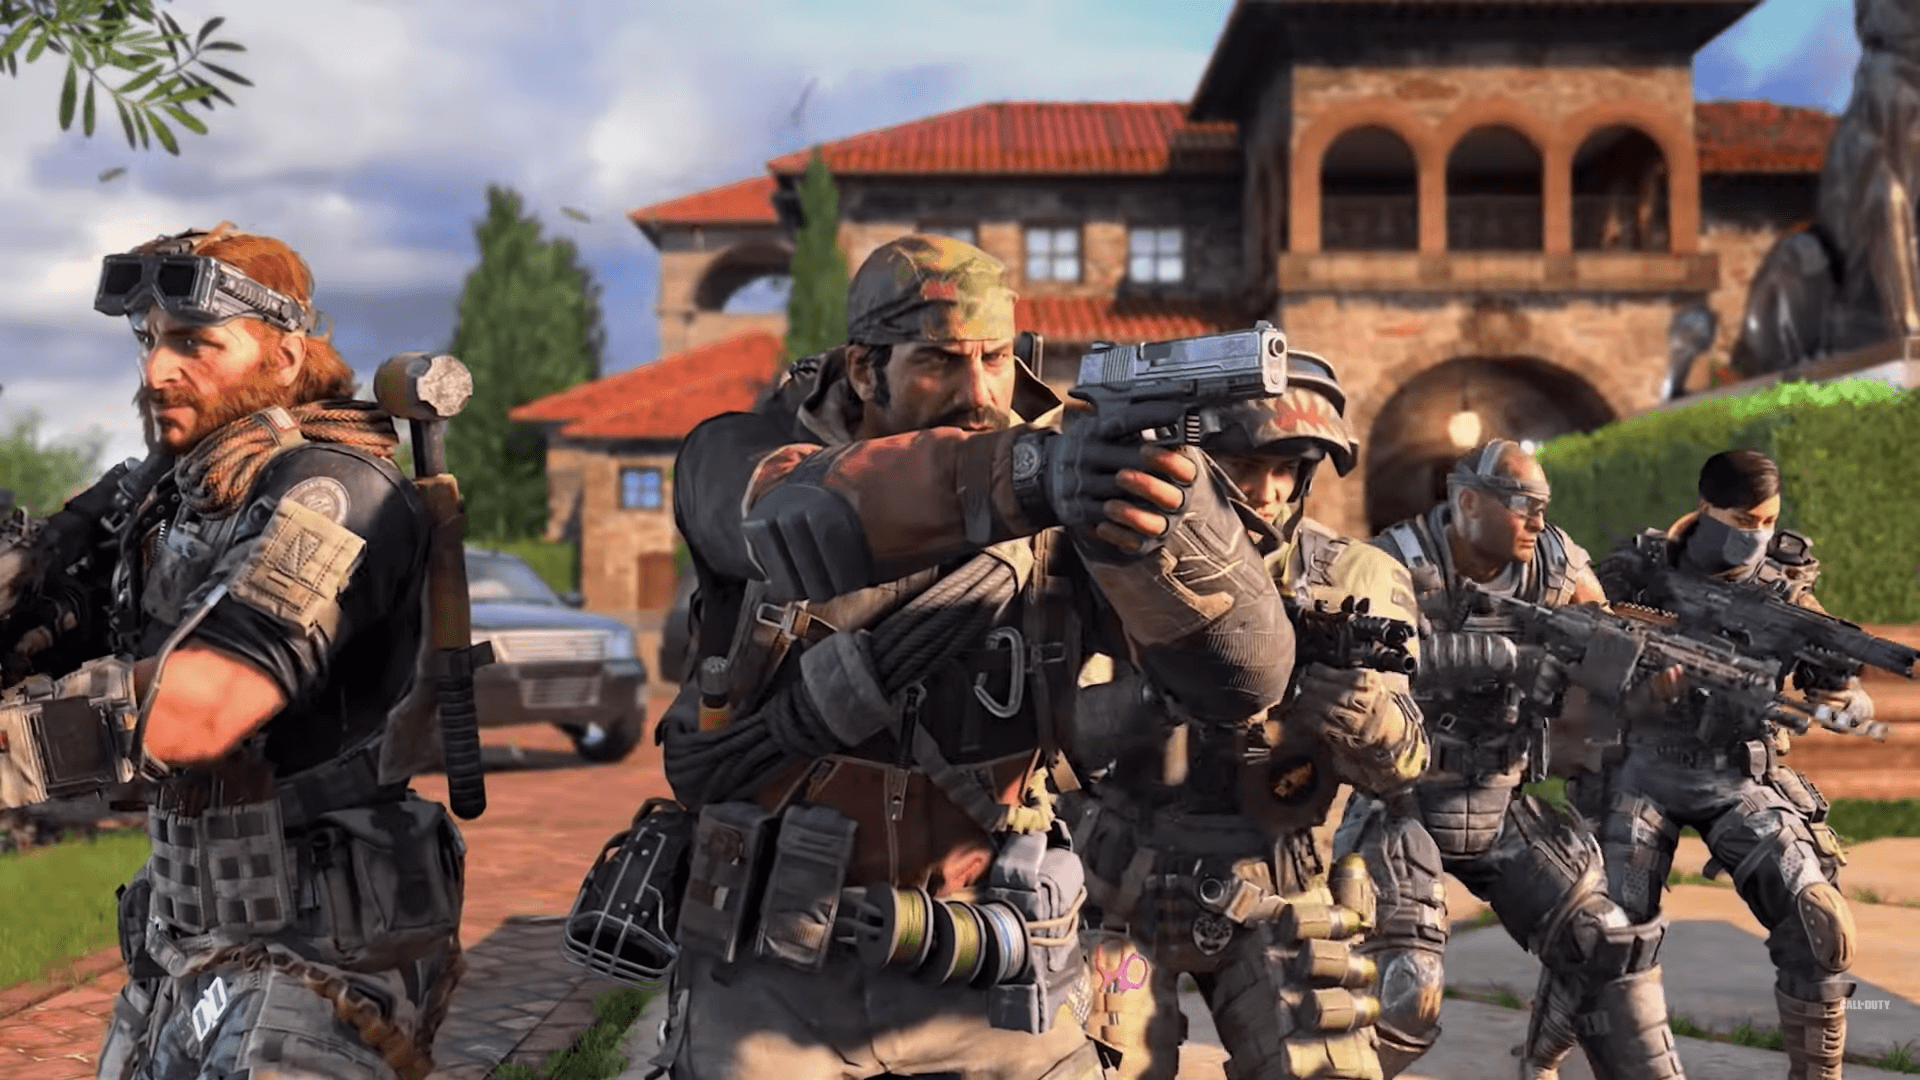 Call of Duty Black Ops 4 is only £29.95 in this smashing early Black